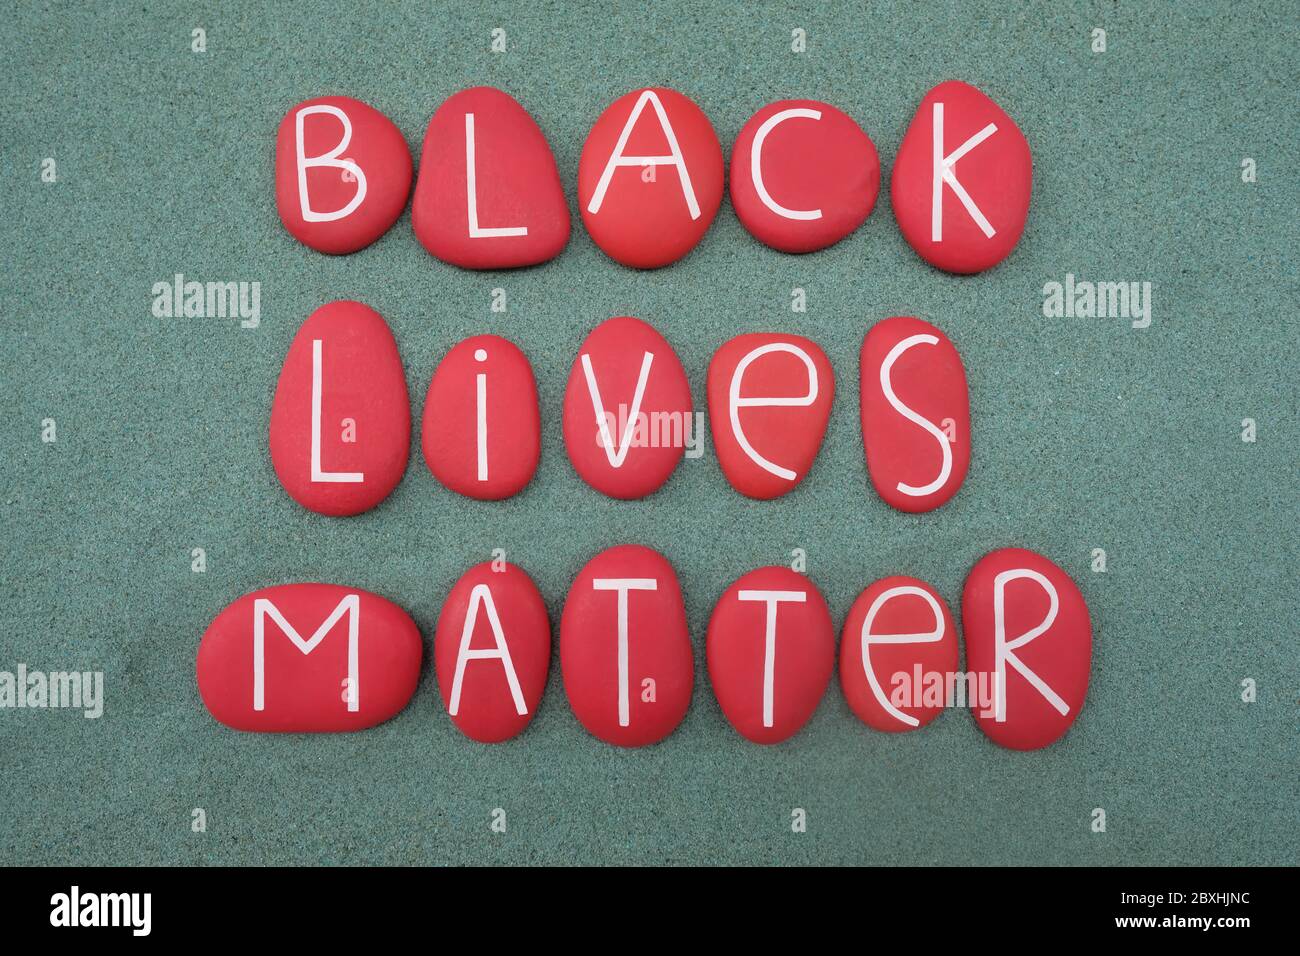 Black Lives Matter, slogan and social issue against violence and systemic racism towards black people composed with red colored stone letters Stock Photo